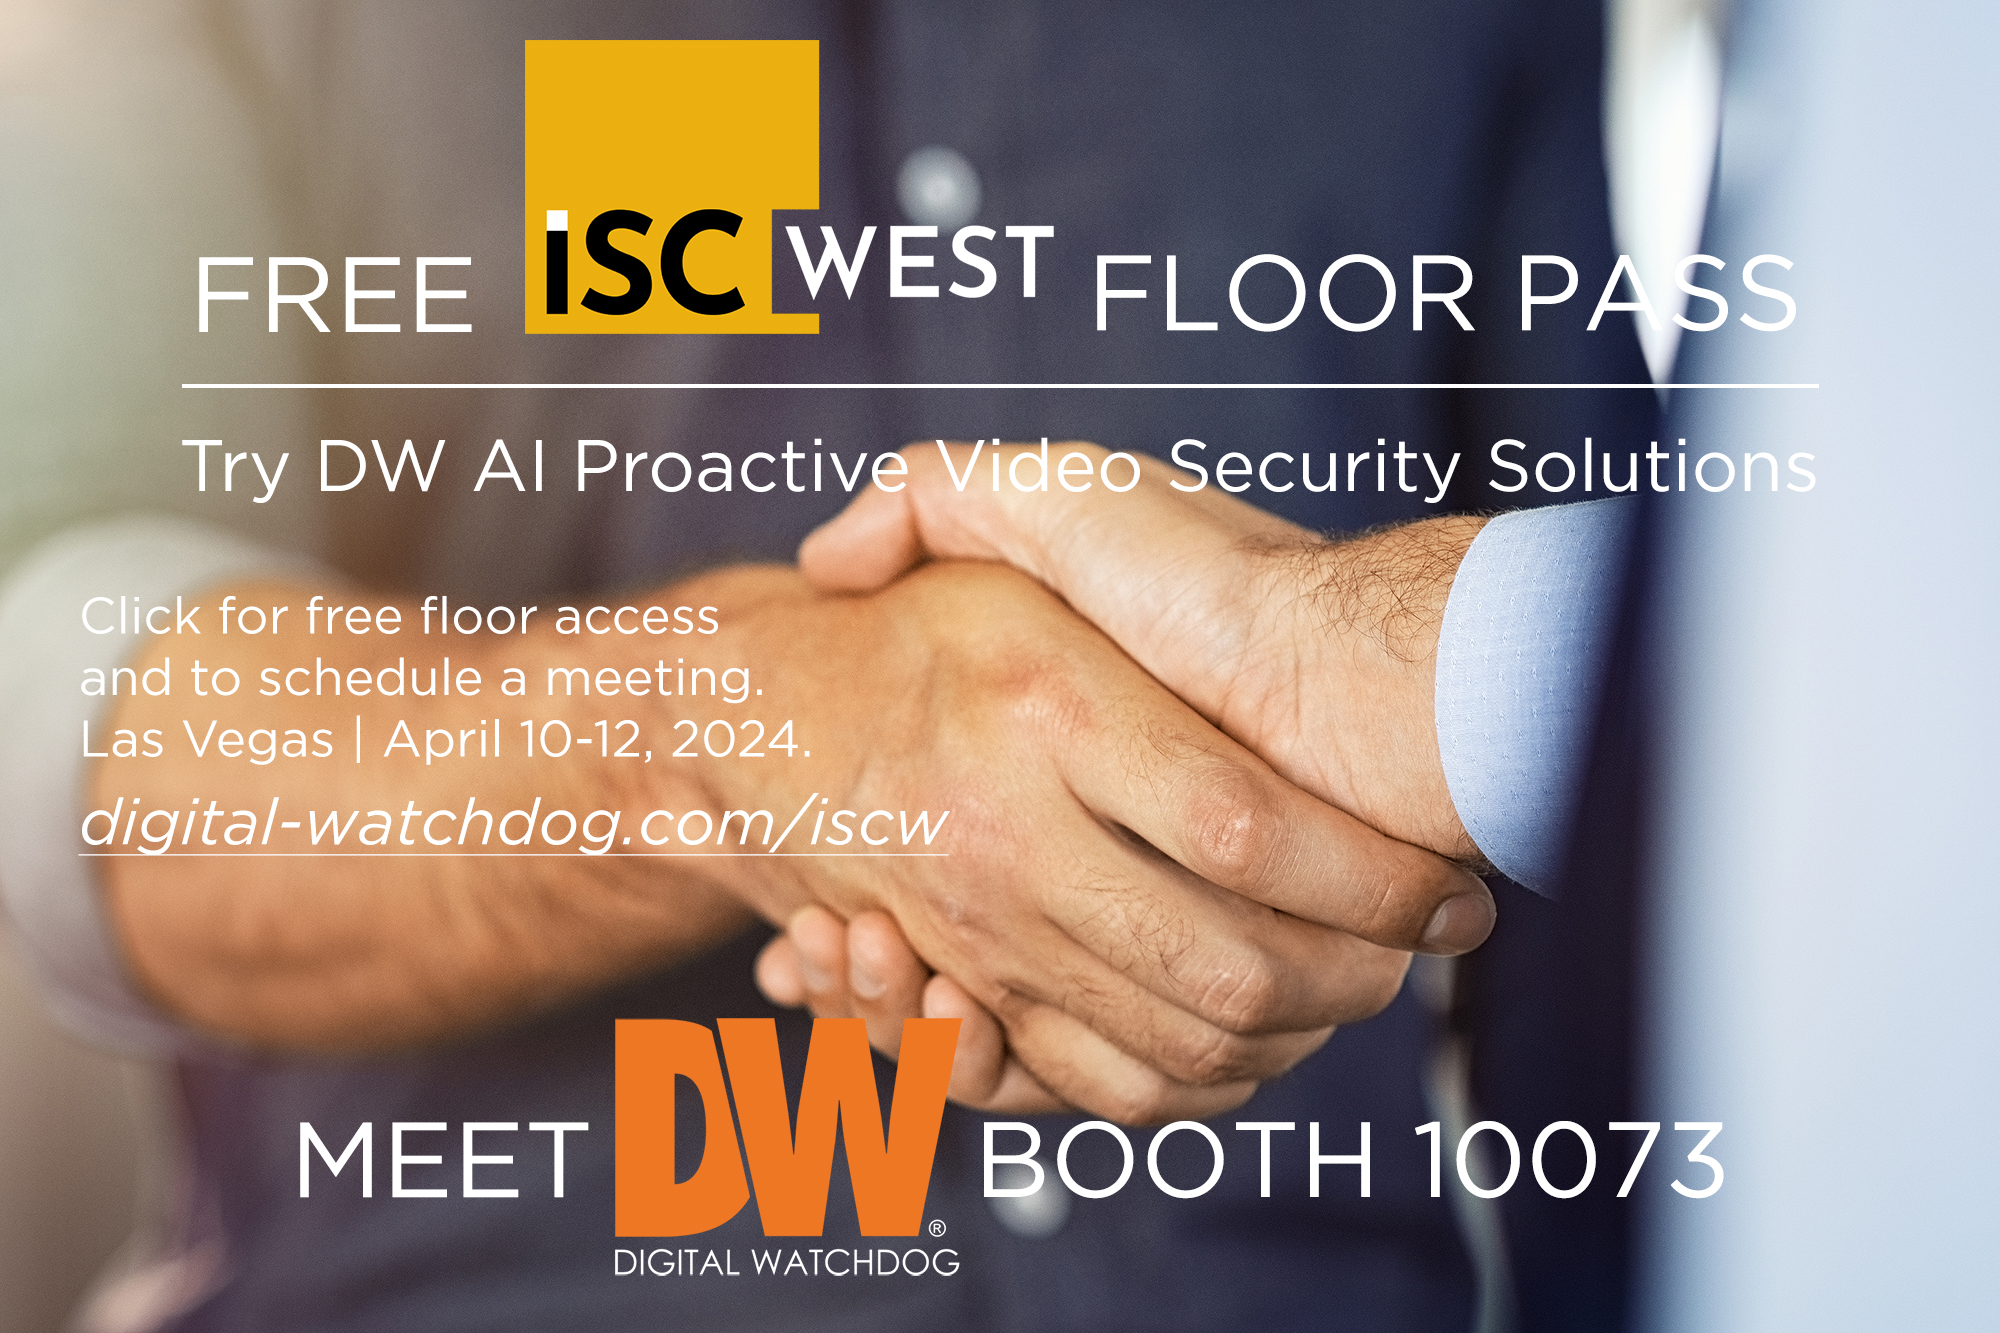 Try DW AI at ISC West